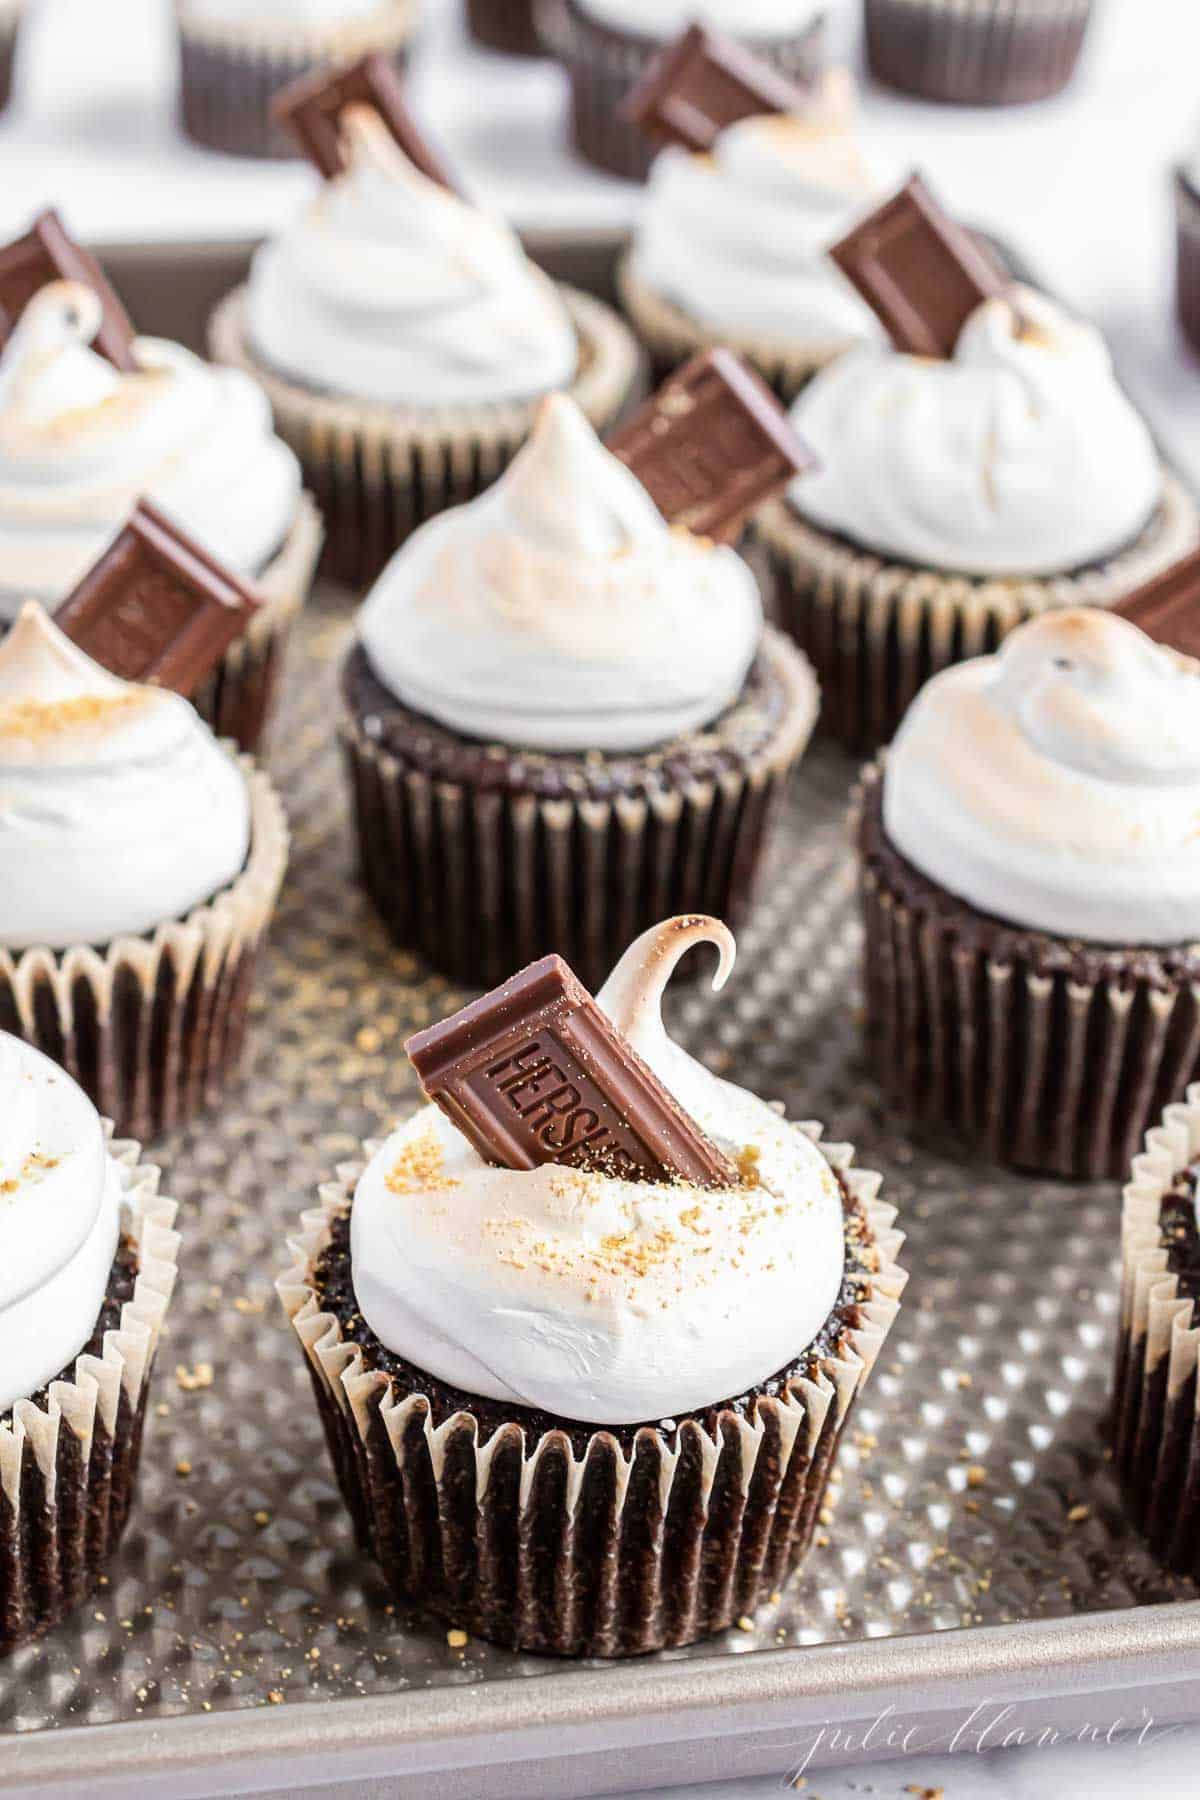 Homemade smores cupcakes on a baking sheet, lined up and topped with marshmallow frosting and a piece of Hersheys bar.